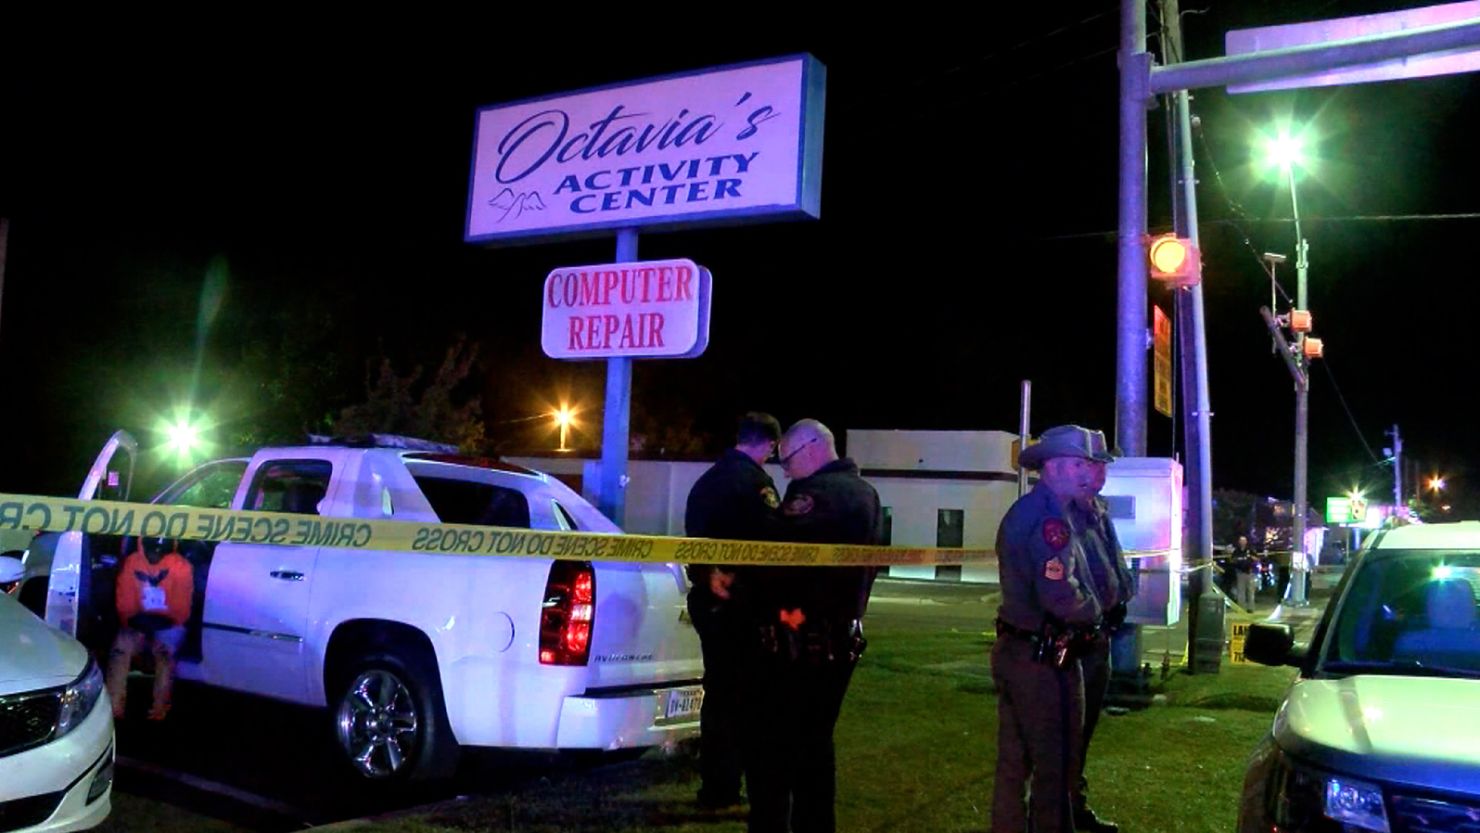 The shooting at Octavia's Activity Center left a 20-year-old man dead.